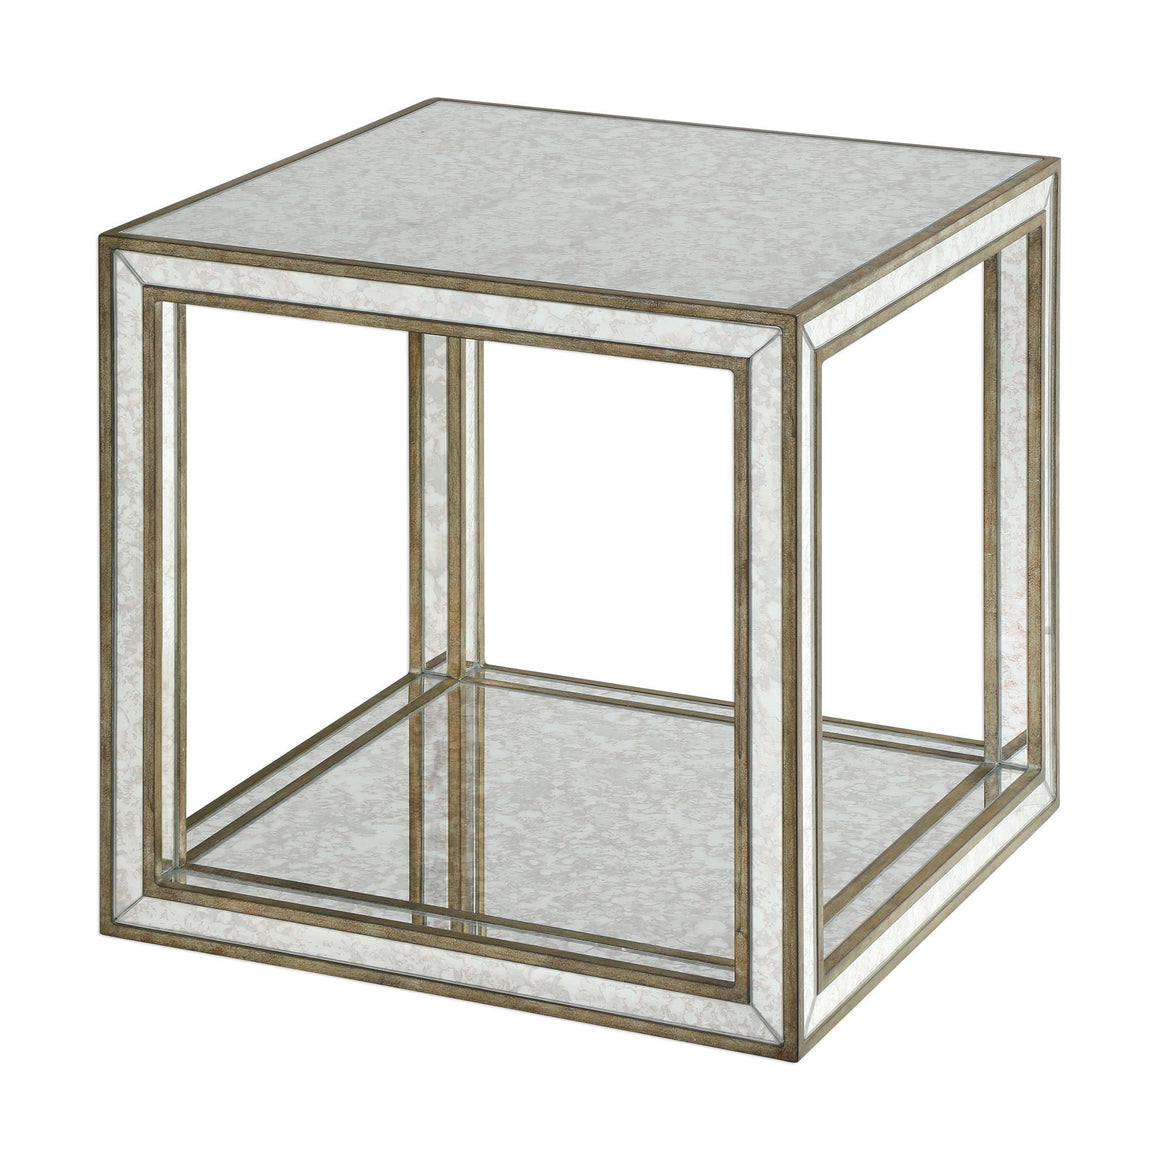 Julie Mirrored Accent Table - taylor ray decor